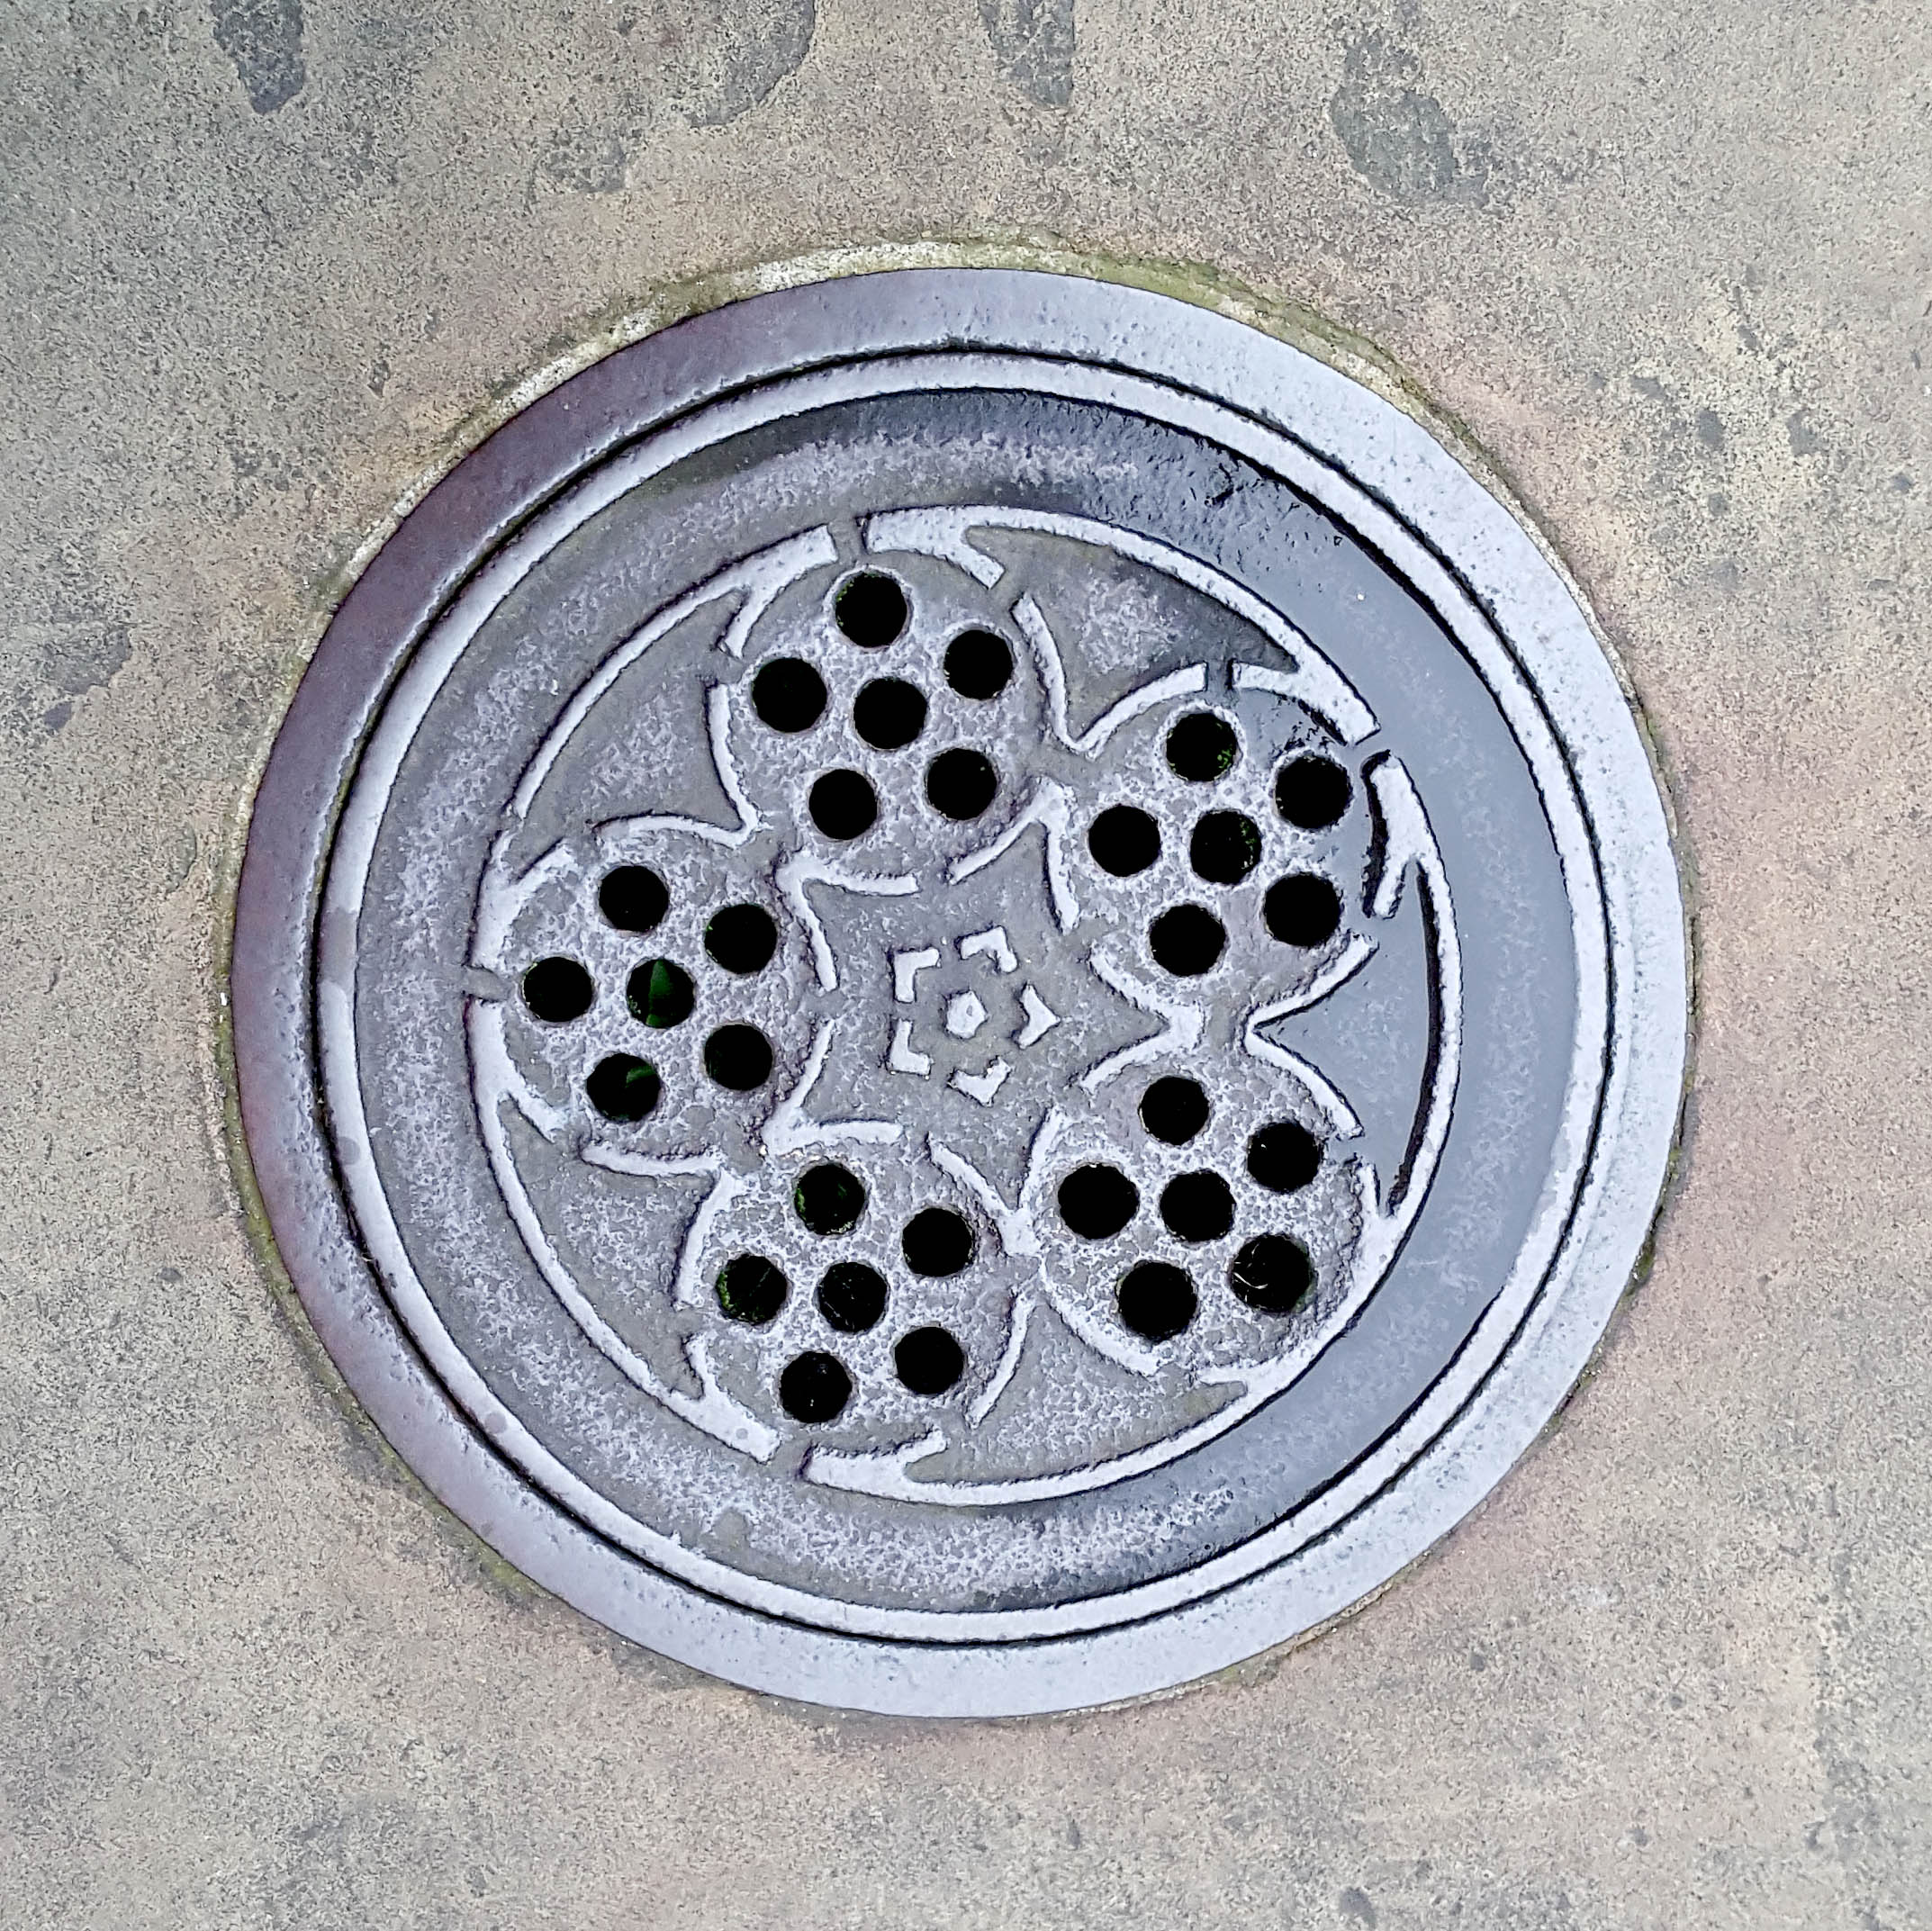 Manhole Cover, London - Cast iron with thirty holes arranged into five circular patterns